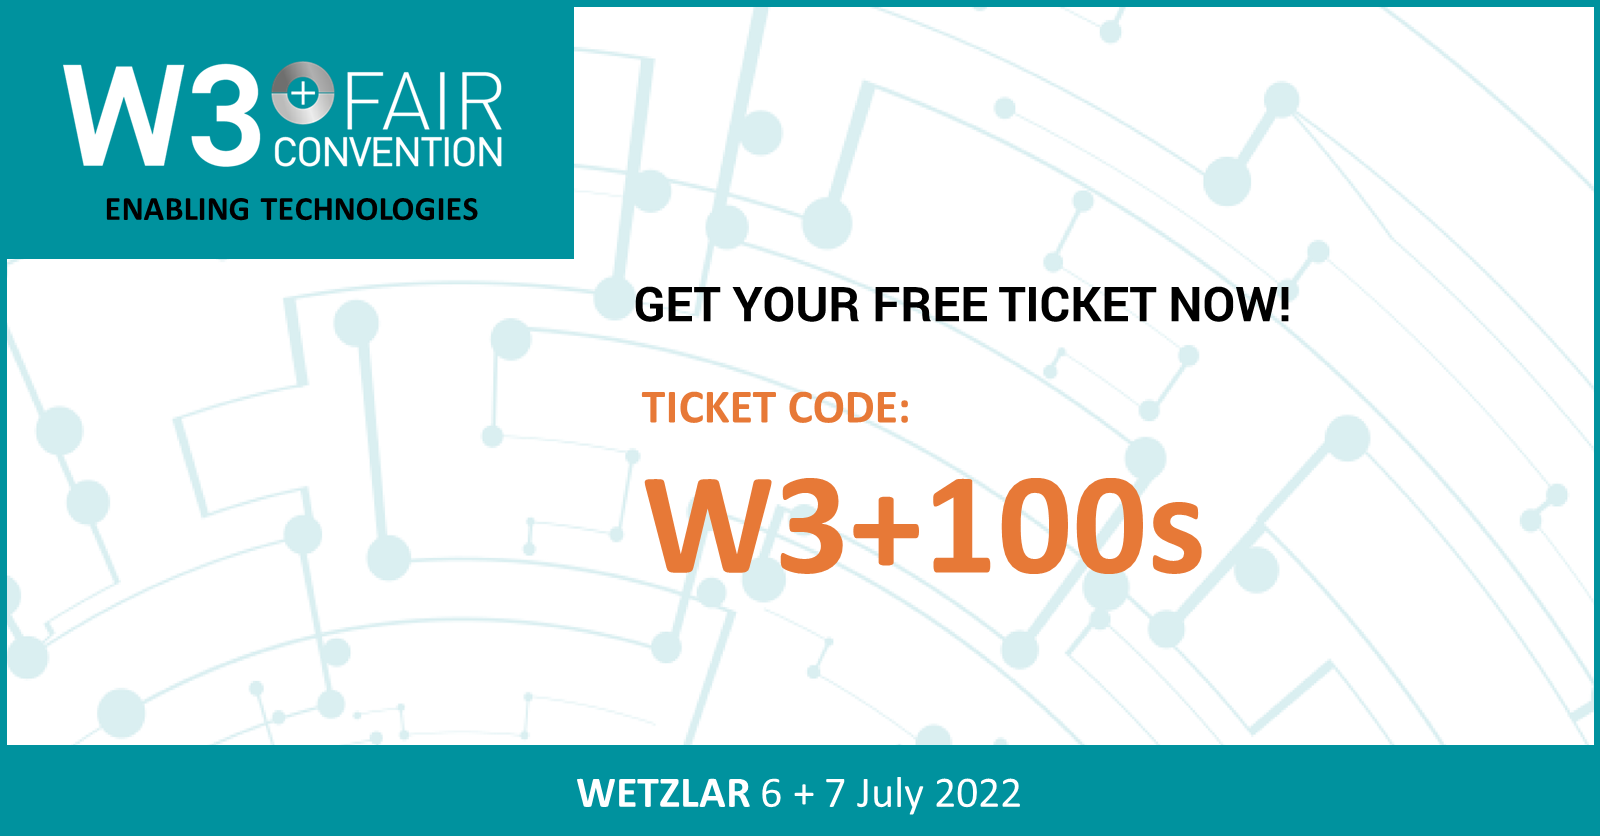 W3+ Fair – save your free ticket now!